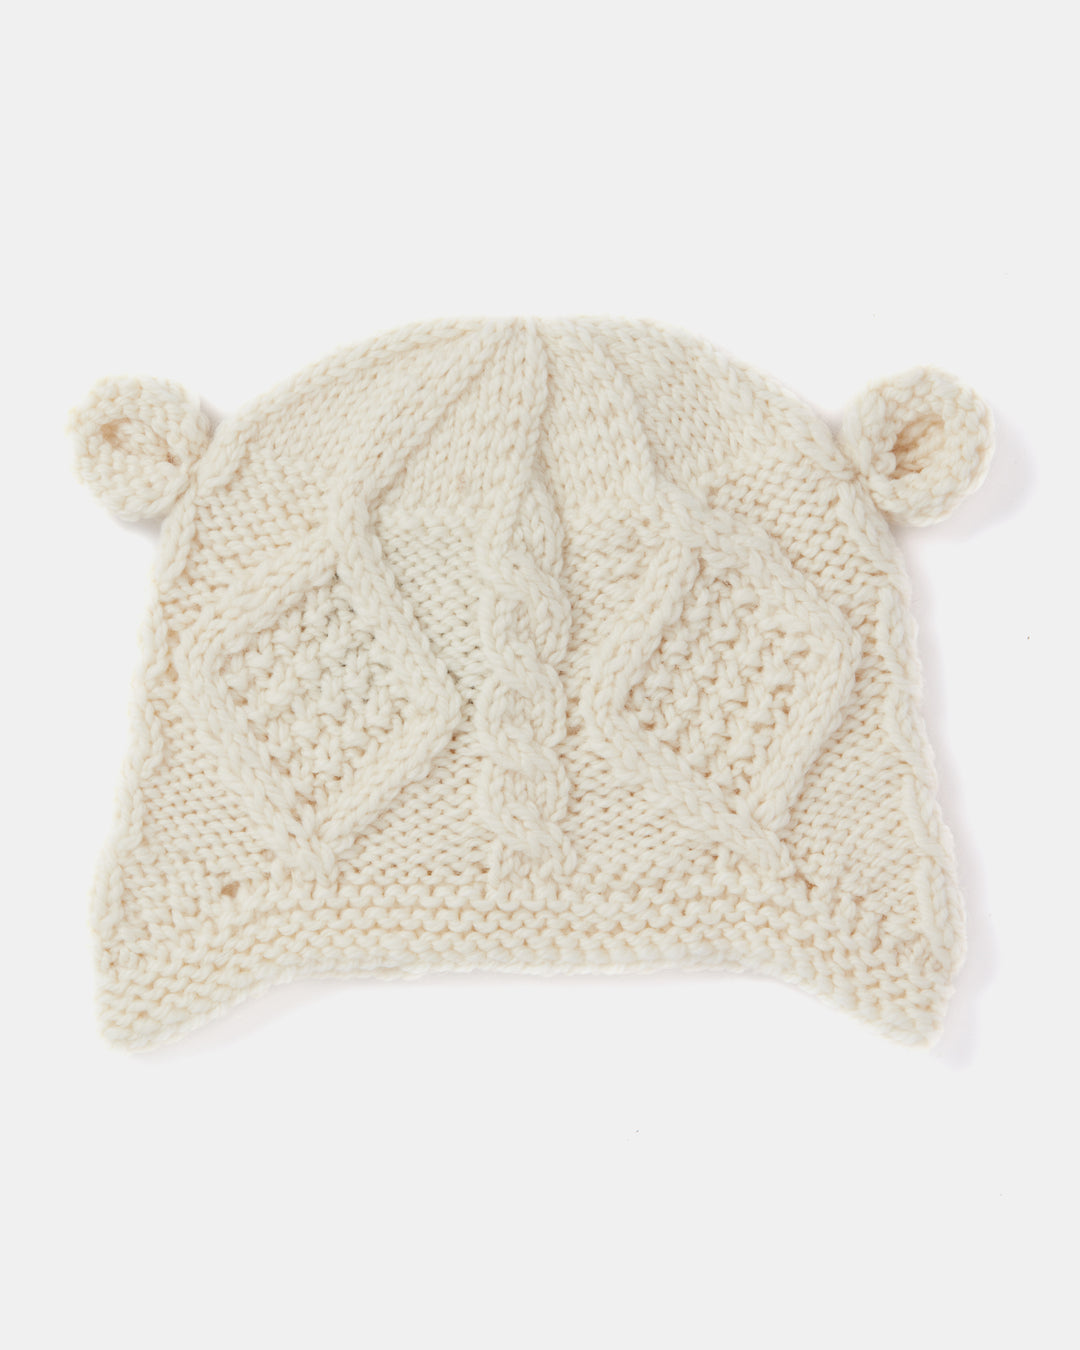 Aran Childrens Hat with Ears